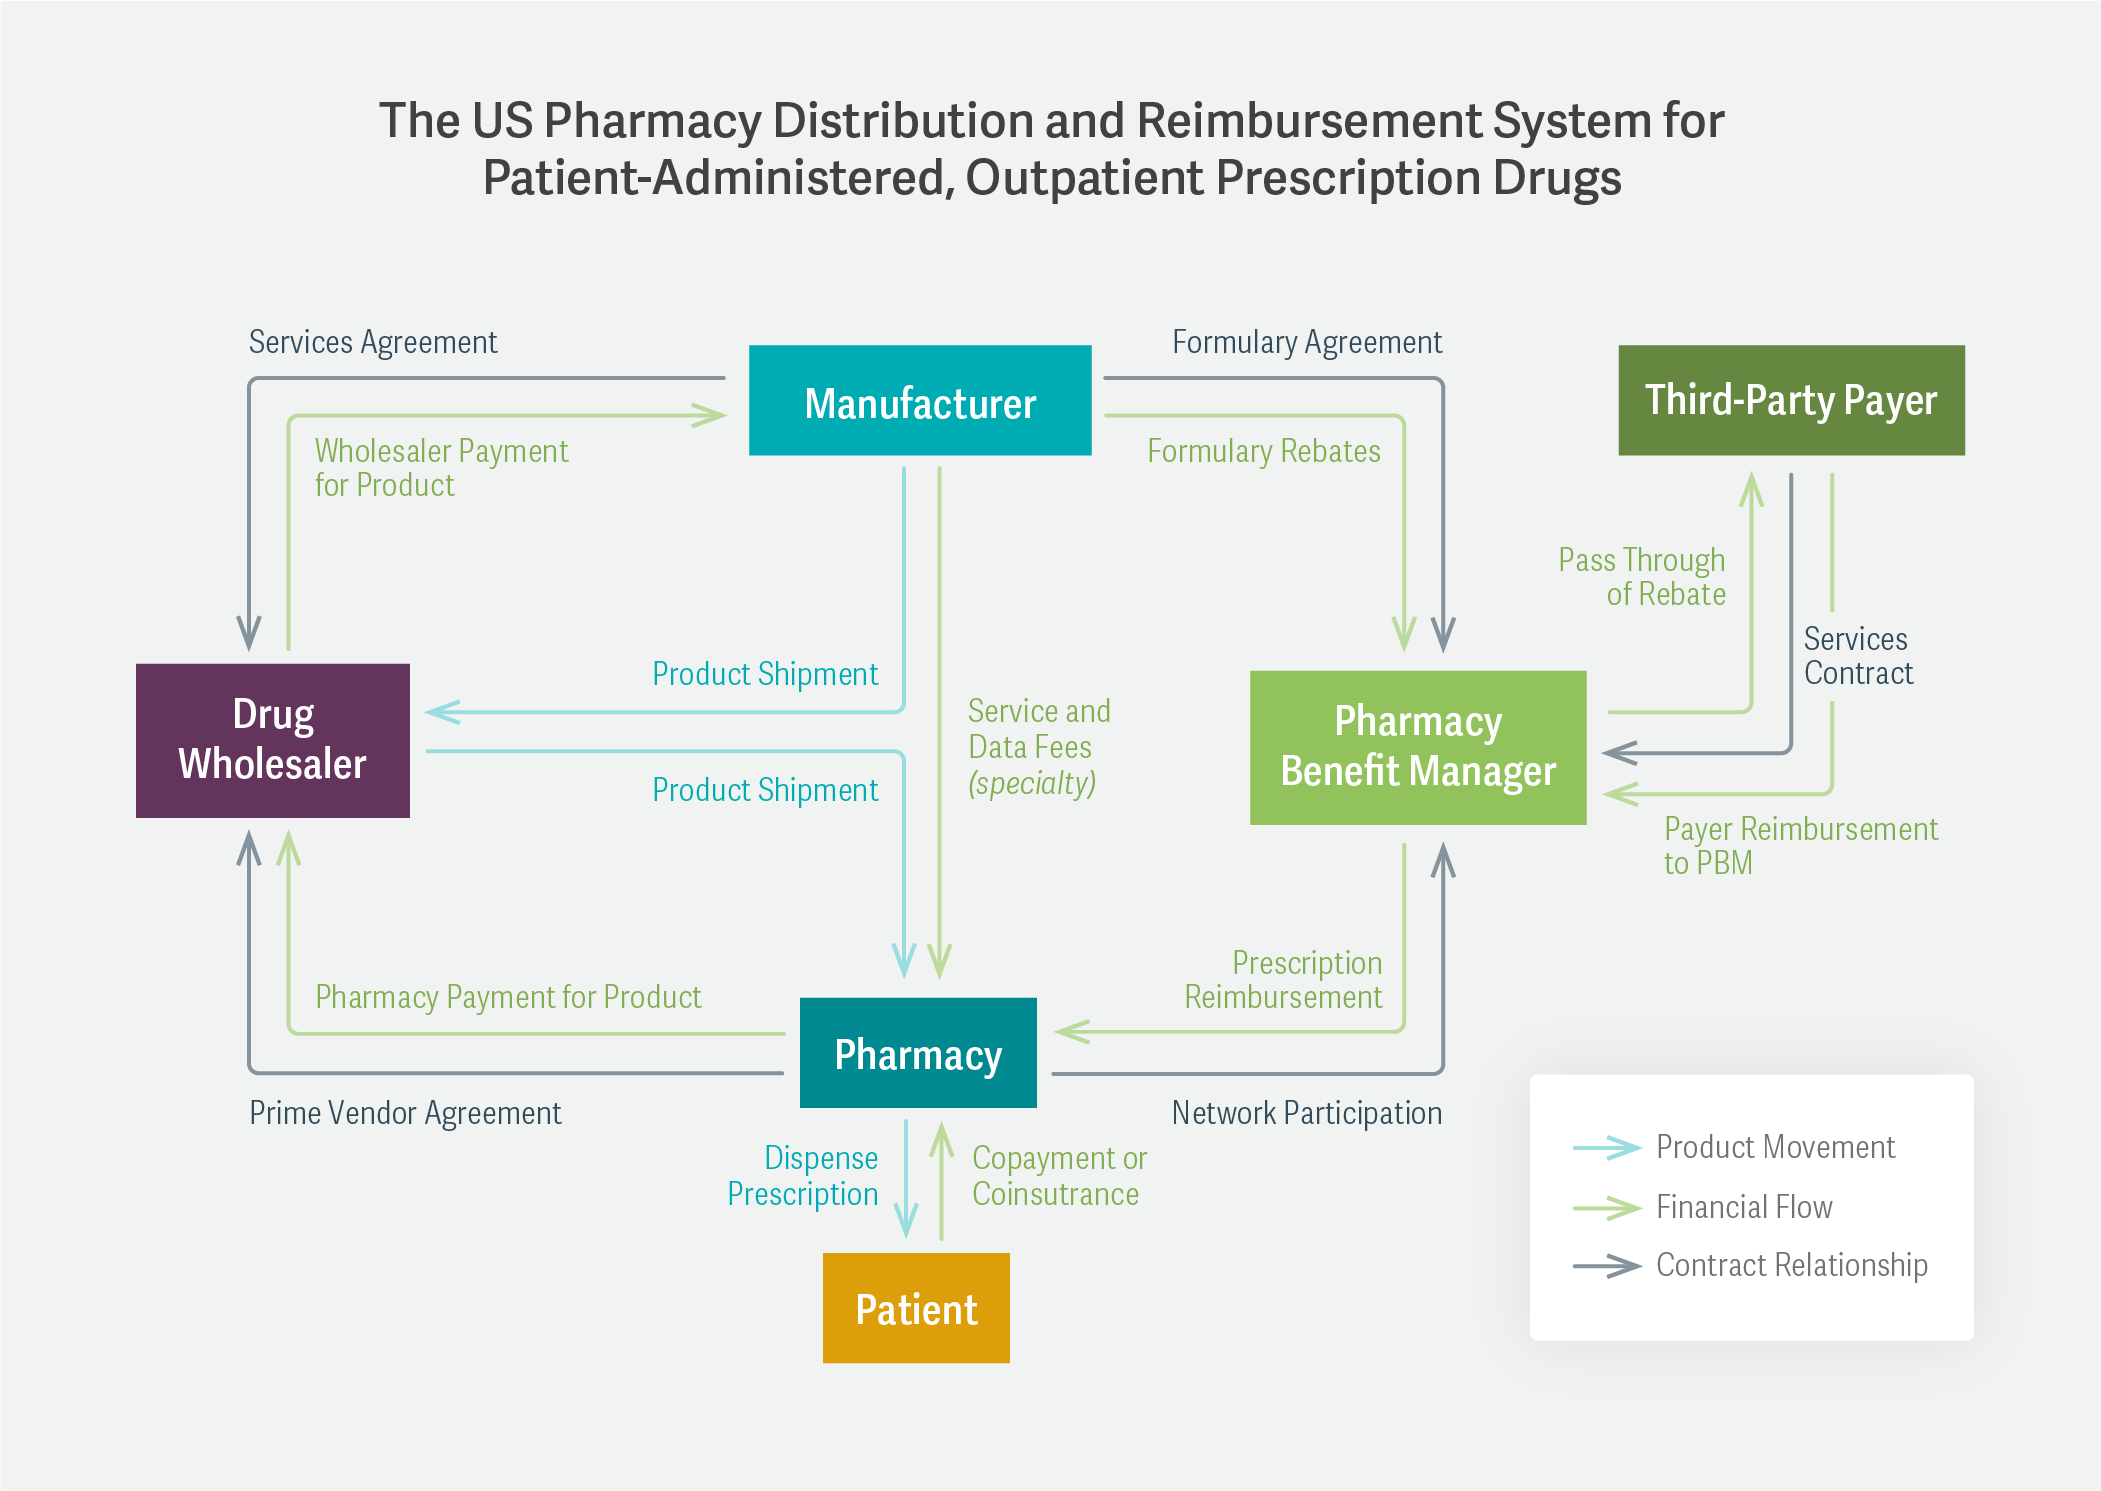 The US Pharmacy Distribution System for Patient-Administered, Outpatient Prescription Drugs